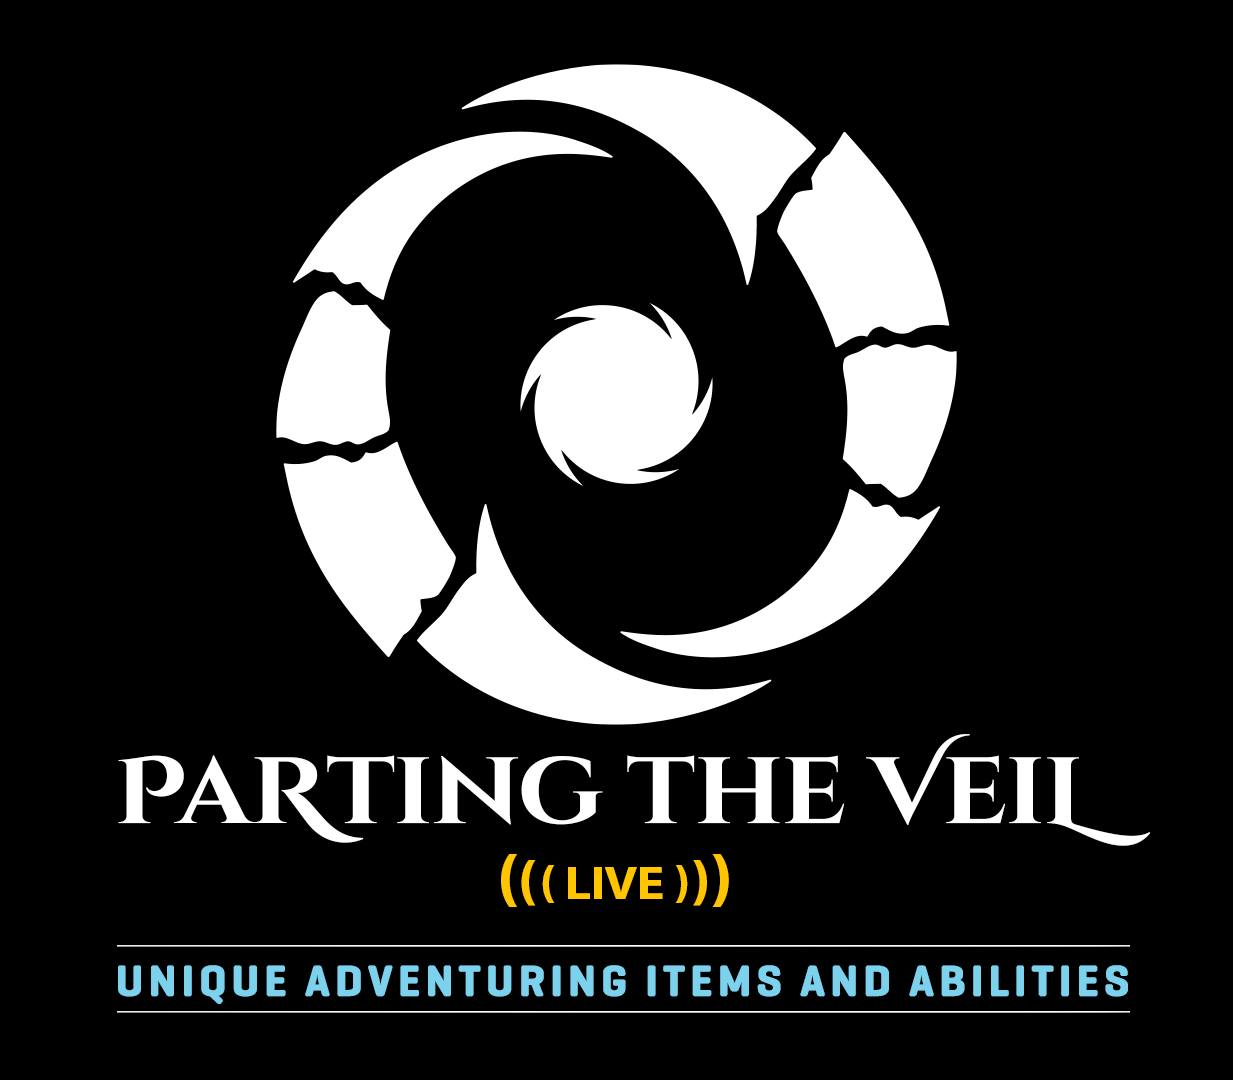 2022-Oct 18: promo for Parting the Veil show with modified Pantheon logo